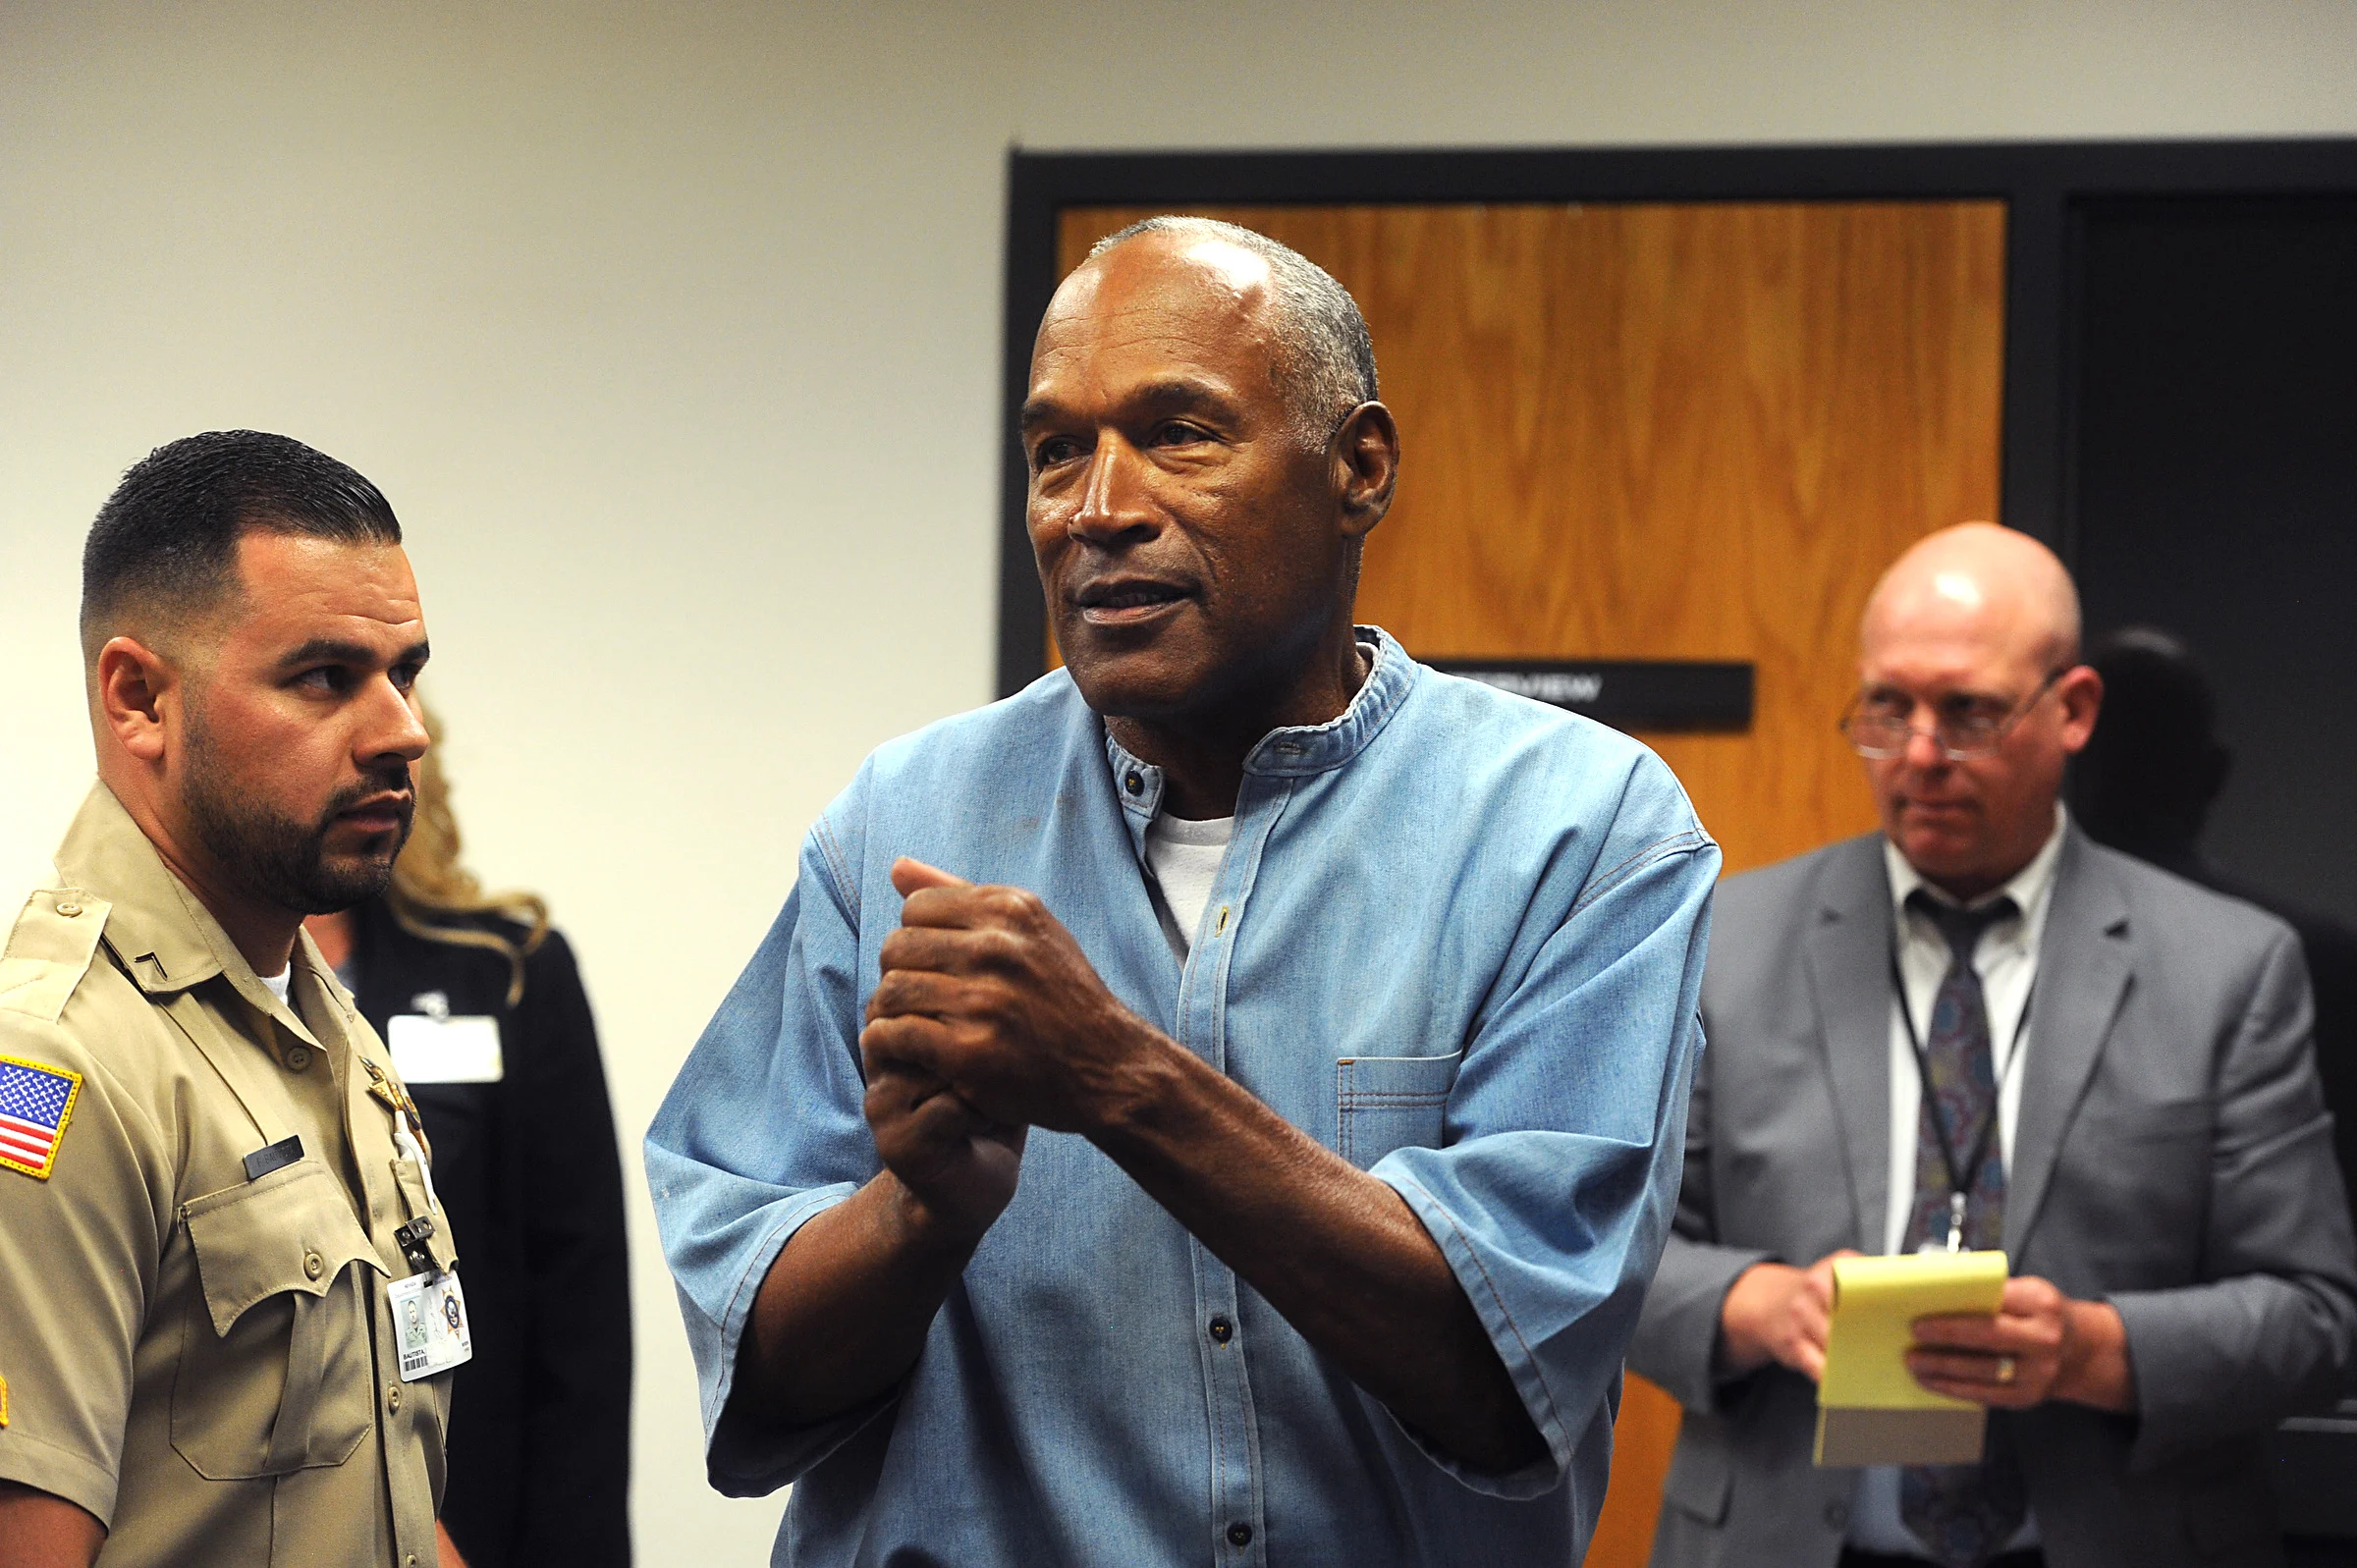 OJ Simpson Only Had One ‘Close Family Member’ By His Side When He Died, Claims Lawyer